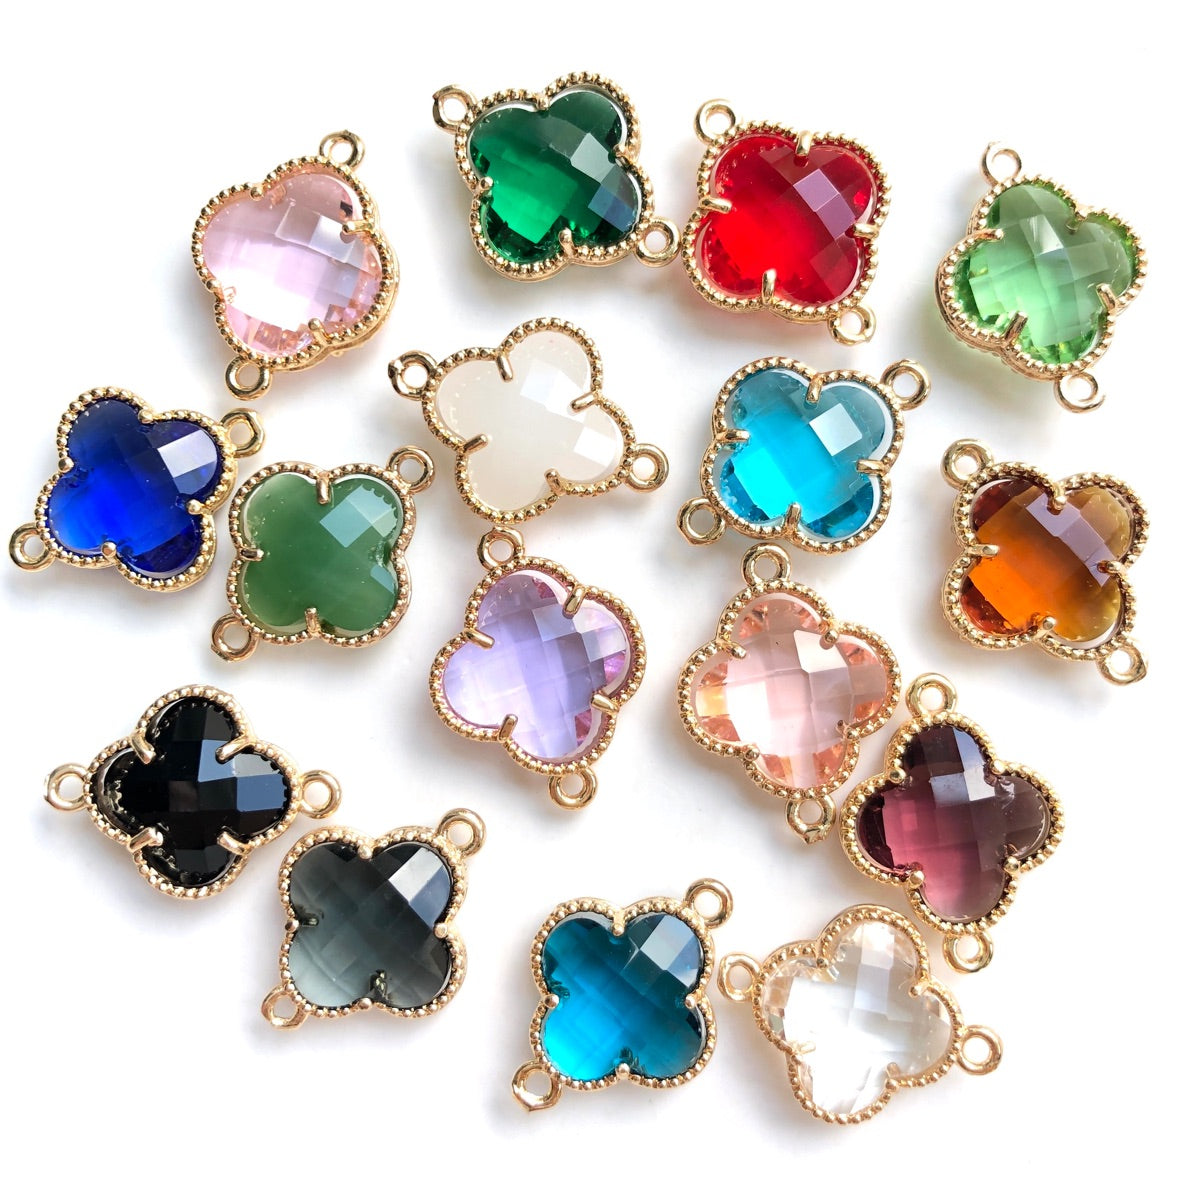 10pcs/Lot Gold Plated Glass Crystal Clover Flower Connectors Mix Random Colors Stone Charms Flower Glass Beads New Charms Arrivals Charms Beads Beyond